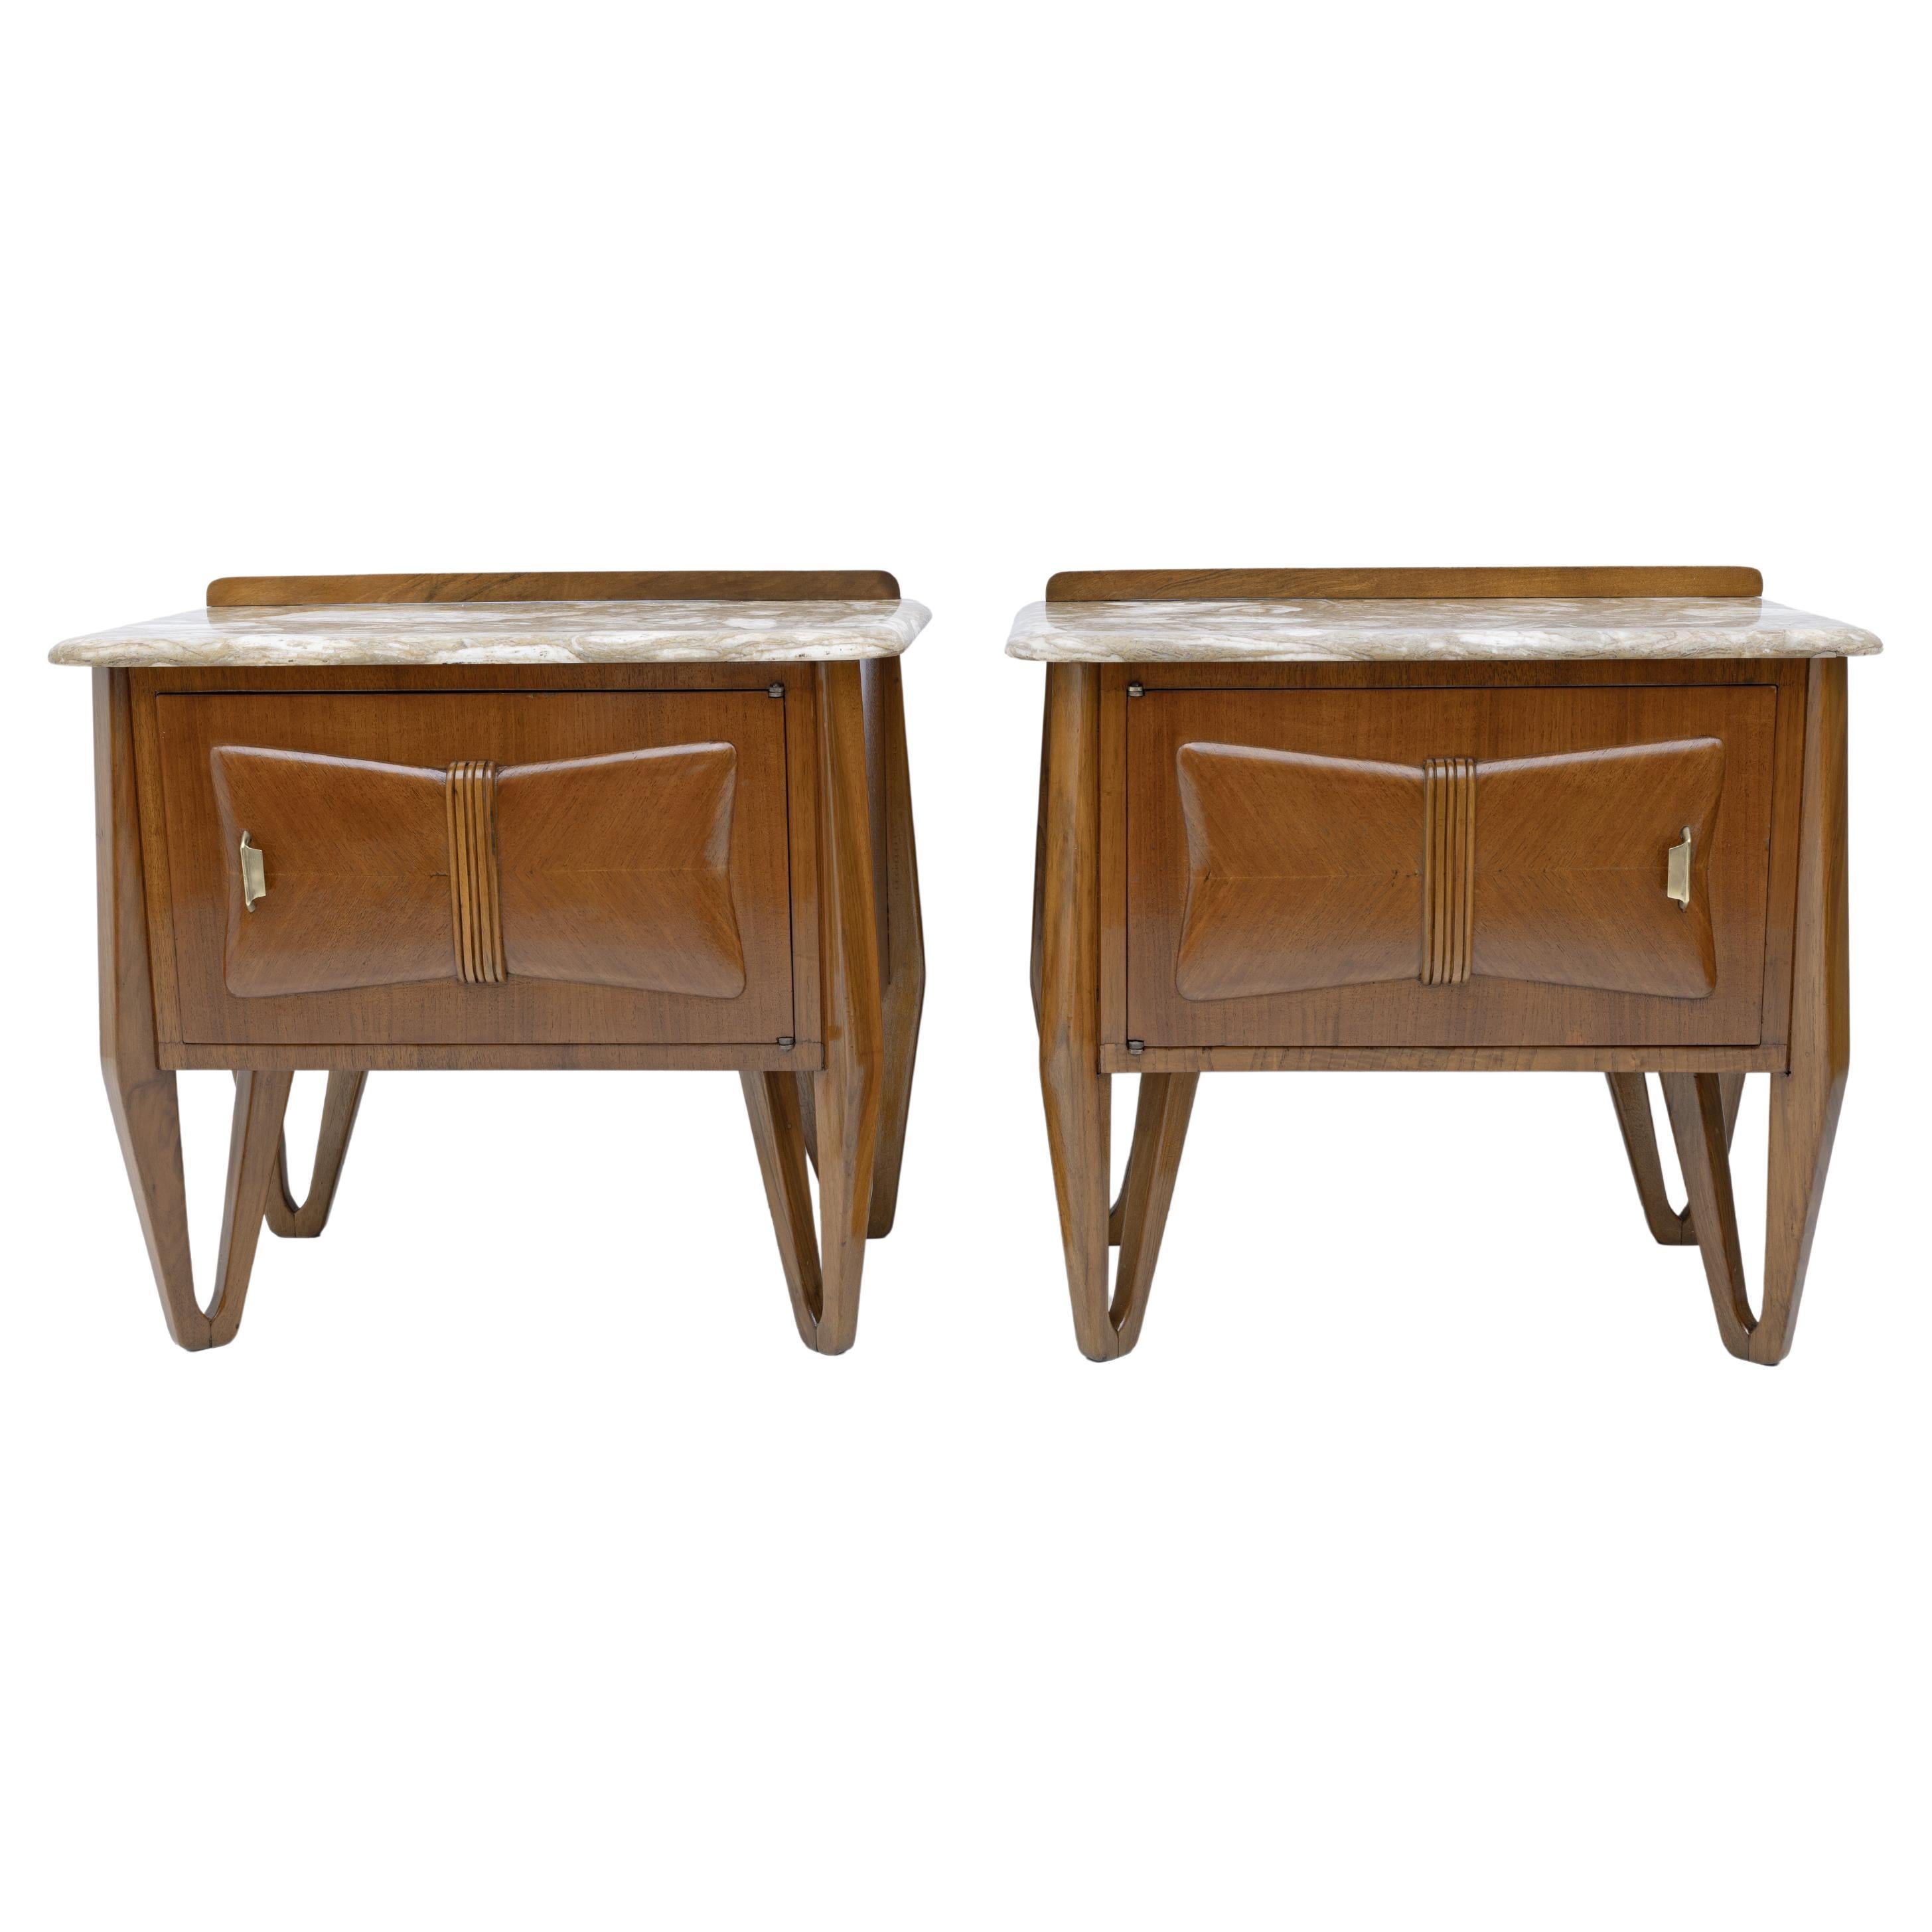 Pair of Mid-Century Modern Italian Walnut and Marble Nightstands, 1950s For Sale